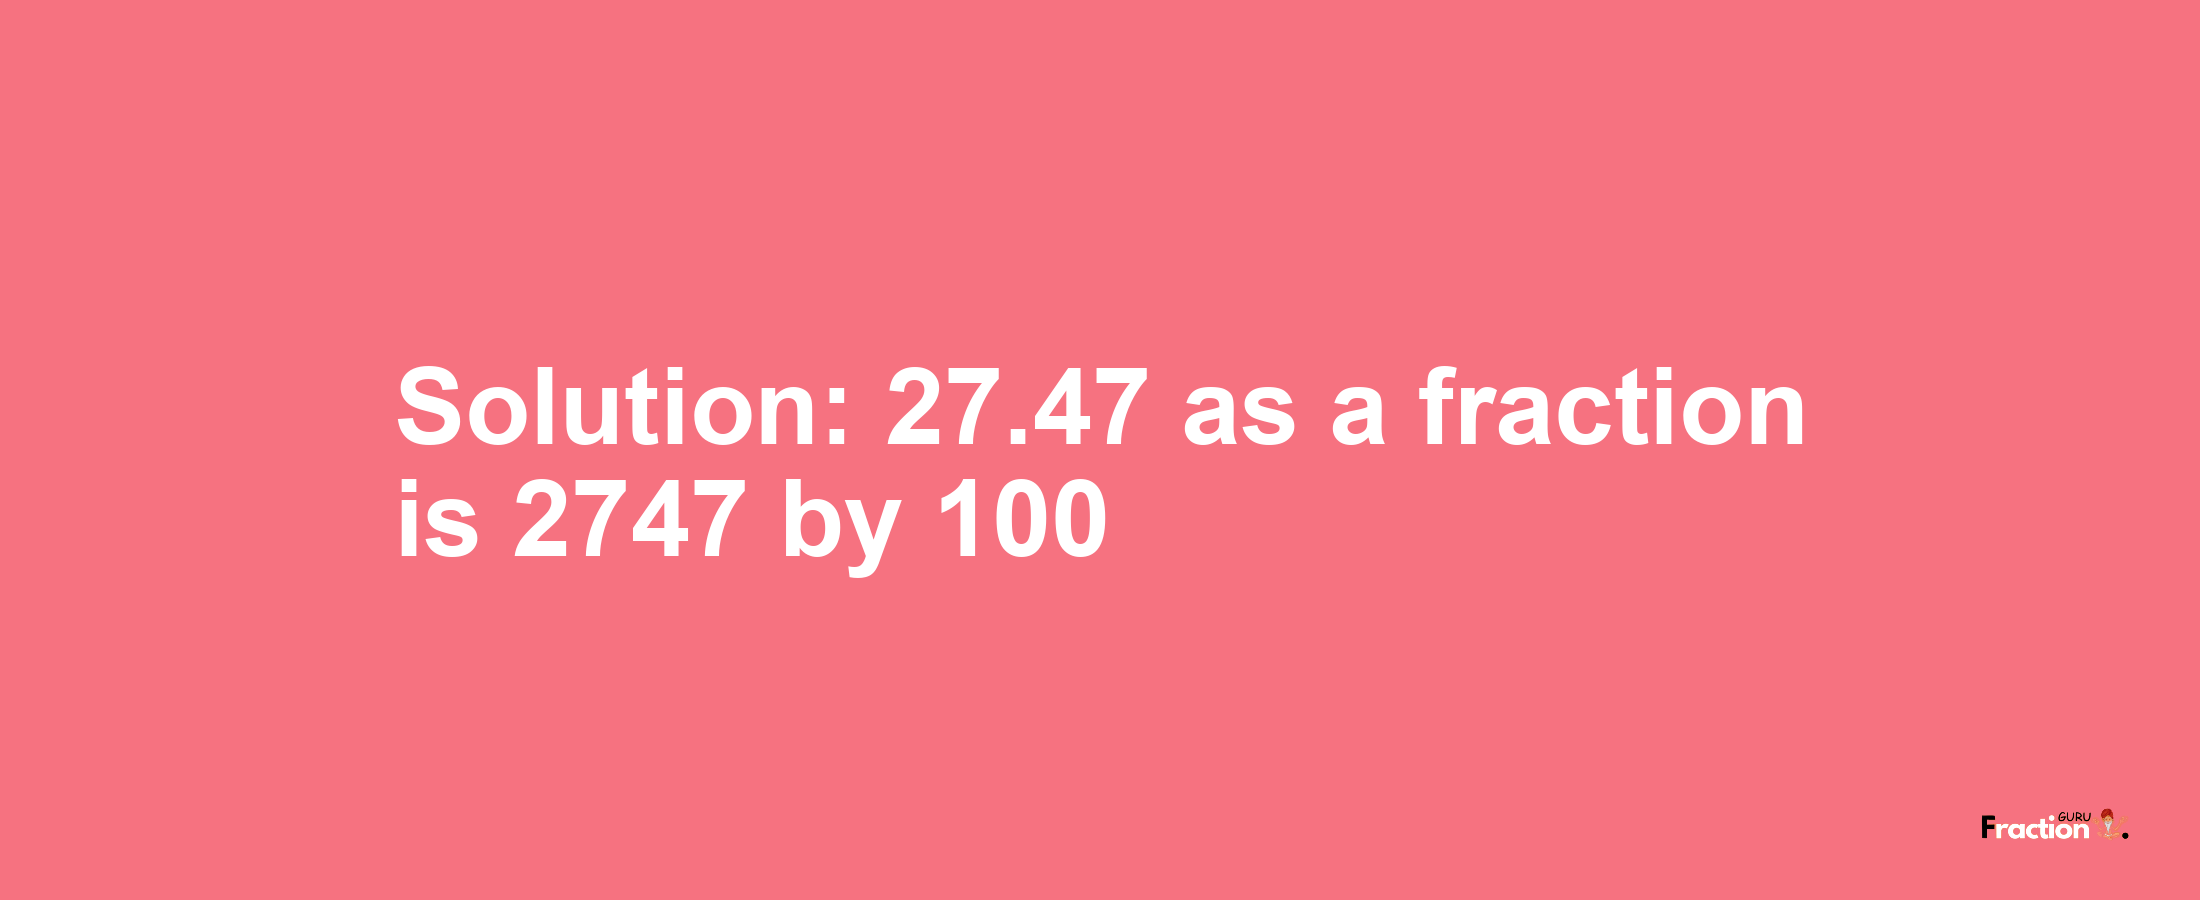 Solution:27.47 as a fraction is 2747/100